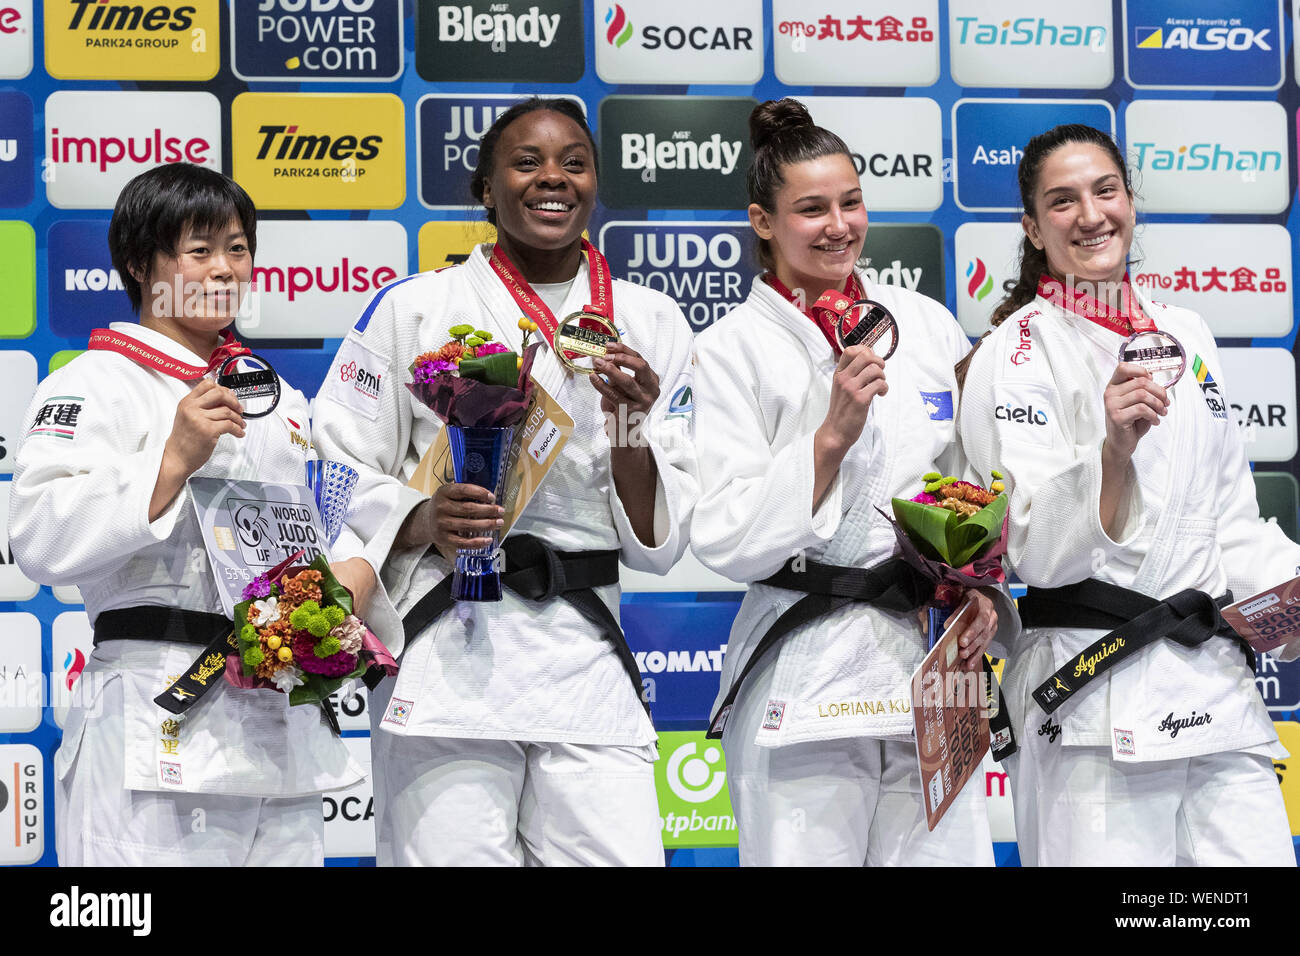 August 30, 2019, Tokyo, Japan: (L to R) Silver medalist Shori Hamada of Japan, gold medalist Madeleine Malonga of France, bronze medalists Loriana Kuka of Kosovo and Mayra Aguiar of Brazil, pose for the cameras during the award ceremony of the women's -78kg category at World Judo Championships Tokyo 2019 in the Nippon Budokan. The World Judo Championships Tokyo 2019 is held from August 25 to September 1st. (Credit Image: © Rodrigo Reyes Marin/ZUMA Wire) Stock Photo